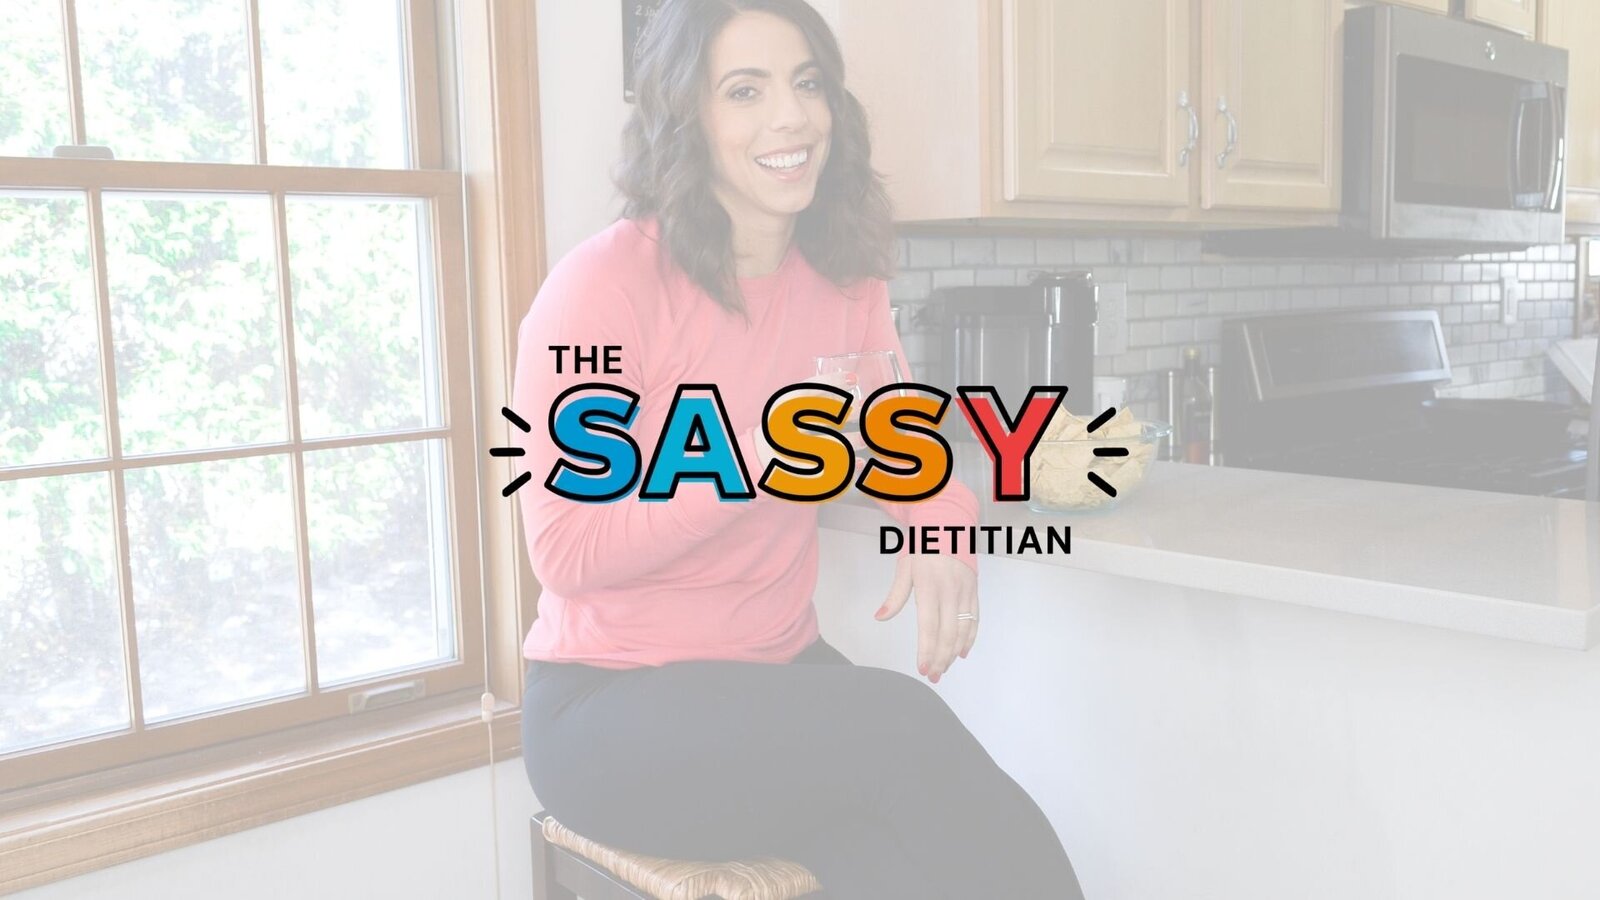 The Sassy Dietitian Branding Overview